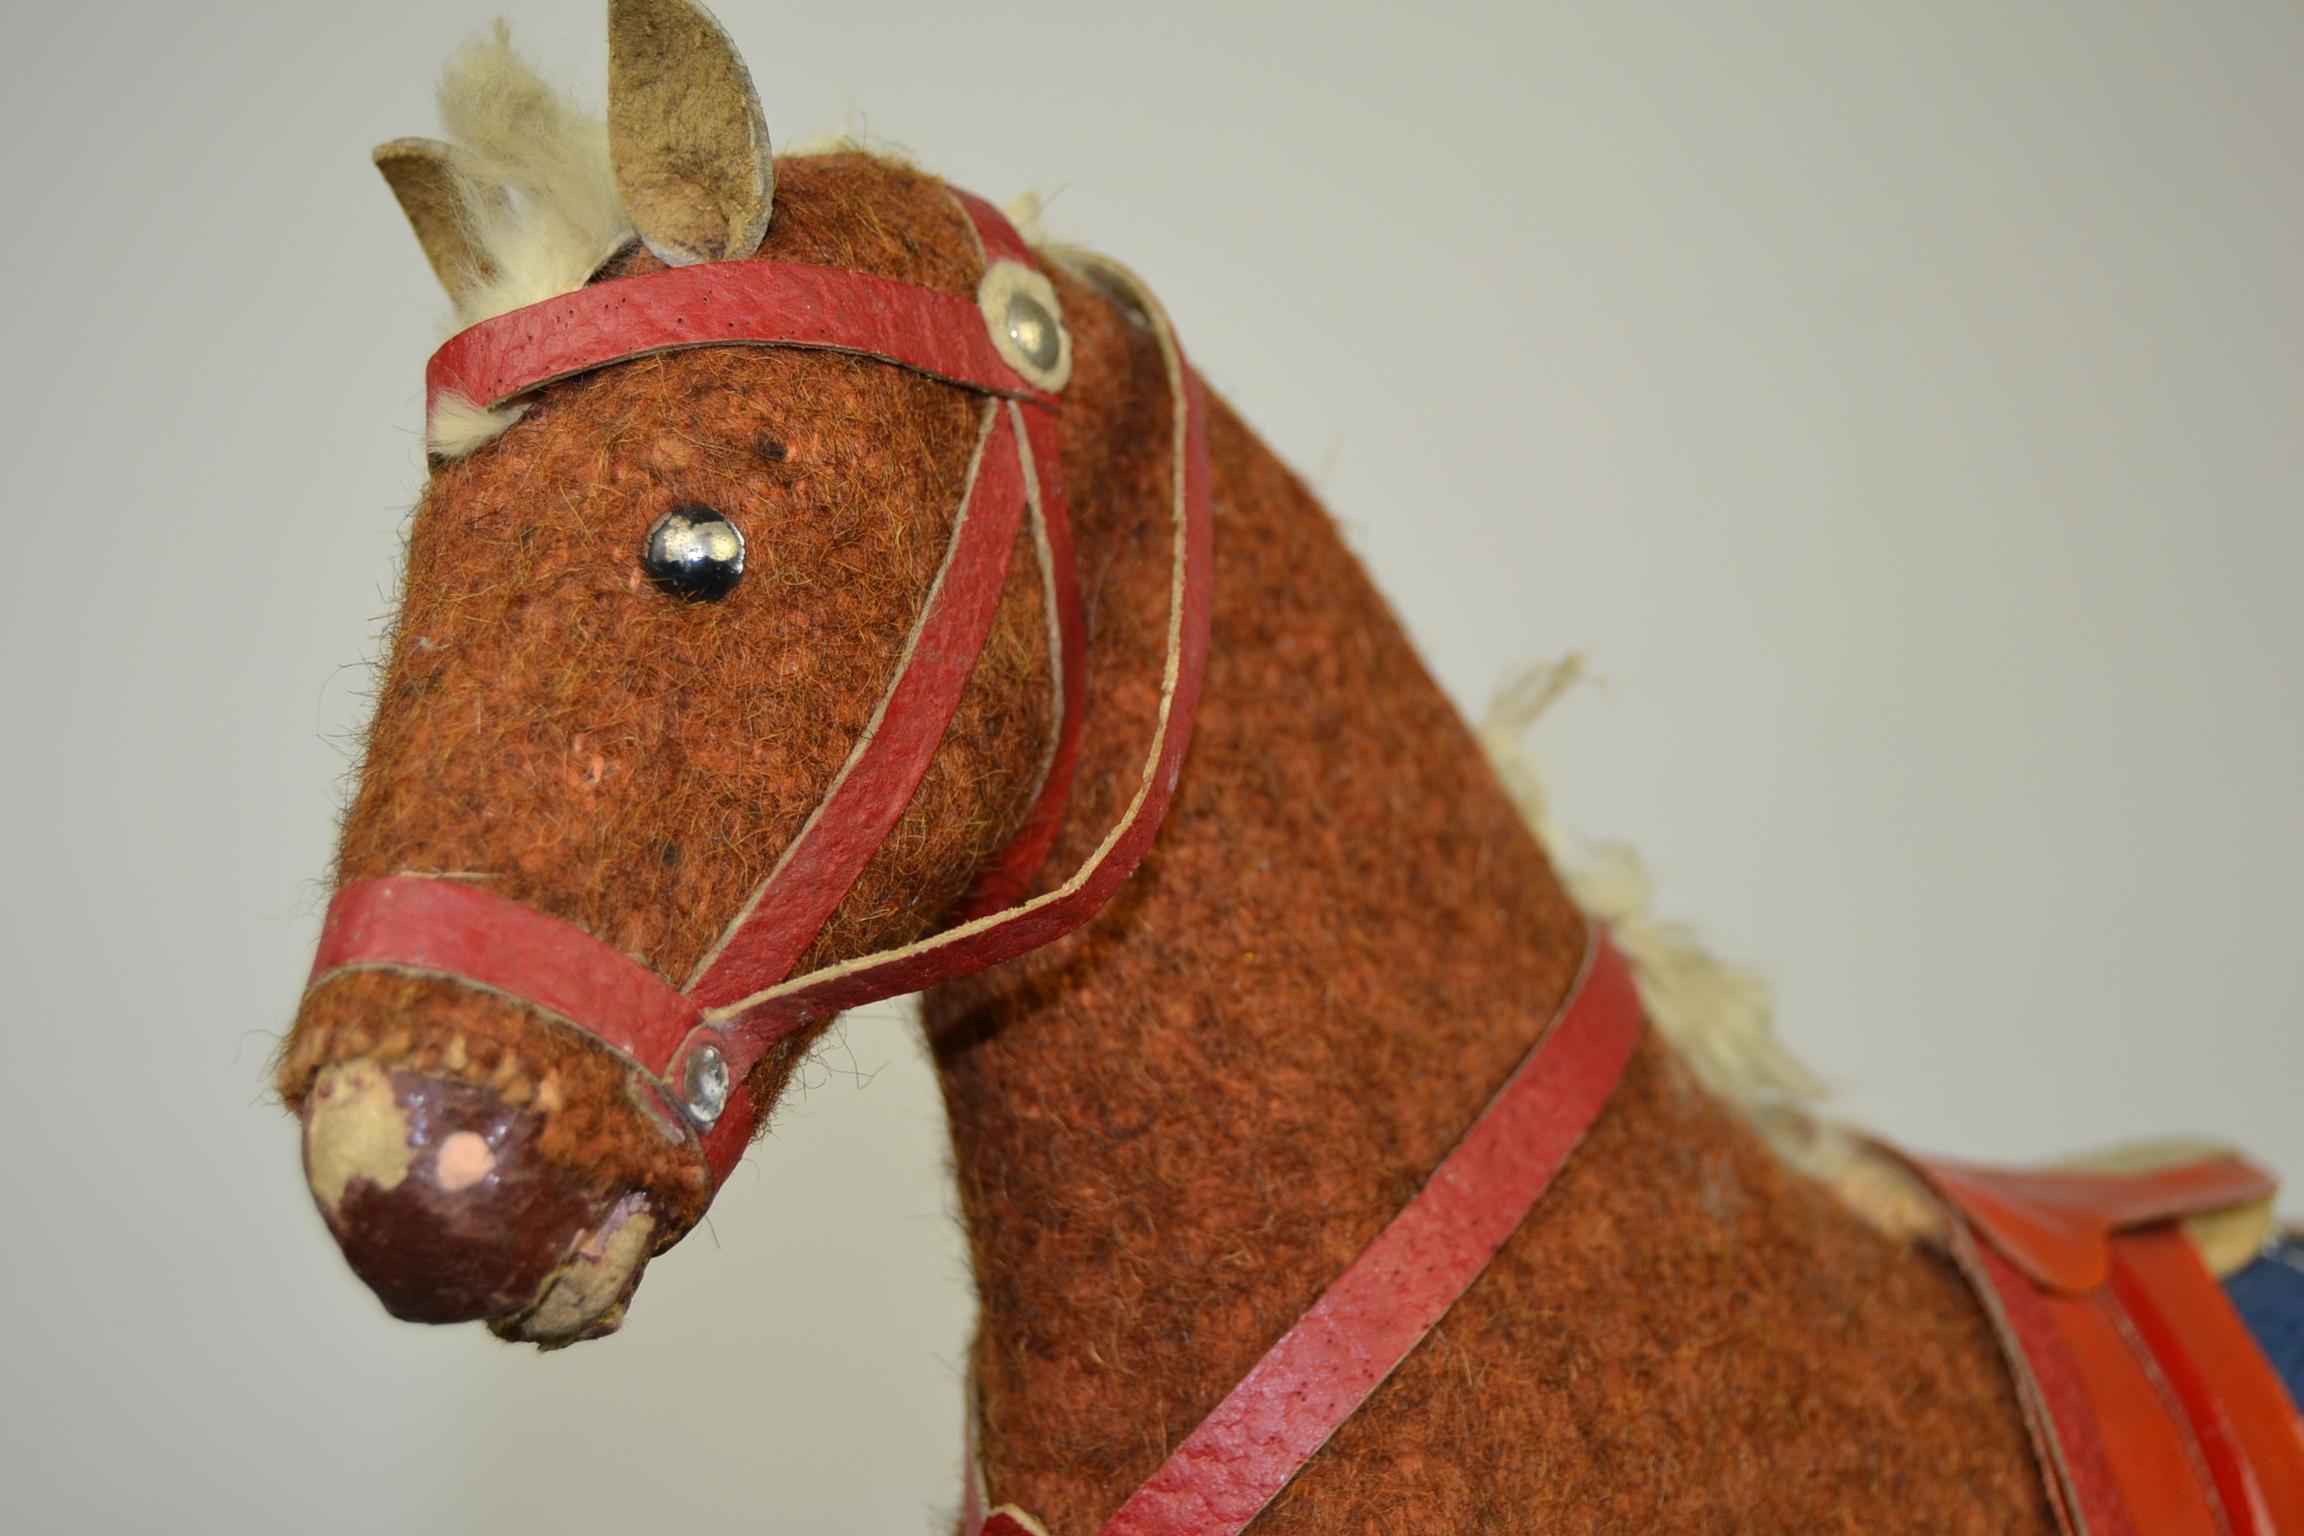 Beautiful antique German toy, a pull toy, a pull horse toy.
This antique toy horse, circa 1930s, is mounted on a wooden platform with wheels. The carved wood horse is covered with rustic brown burlap.
The hooves and snout are also hand carved and